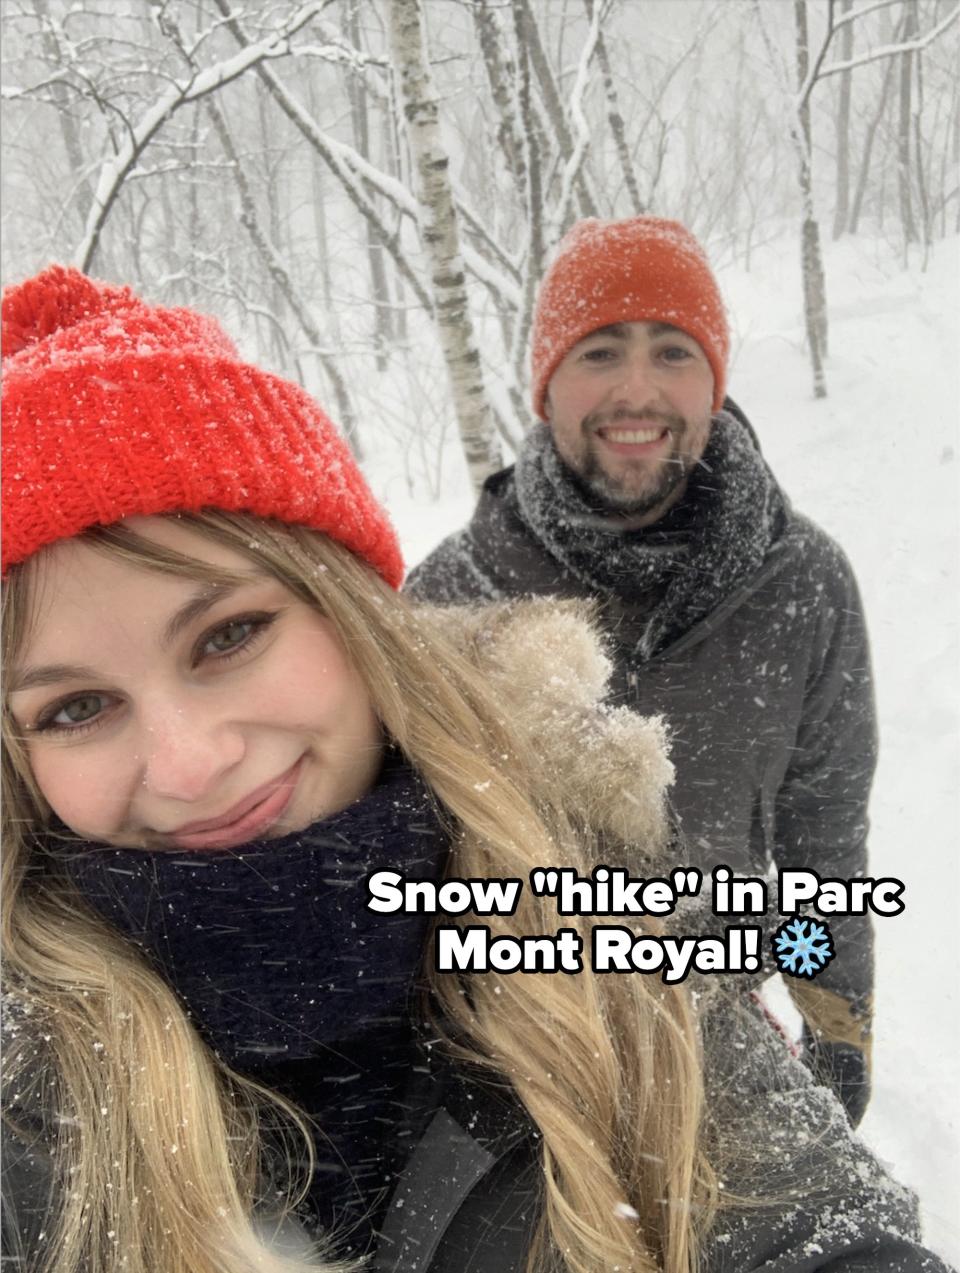 Man and woman smile for a selfie in a snowy forest, each wearing red hats. Trees and snow visible in the background